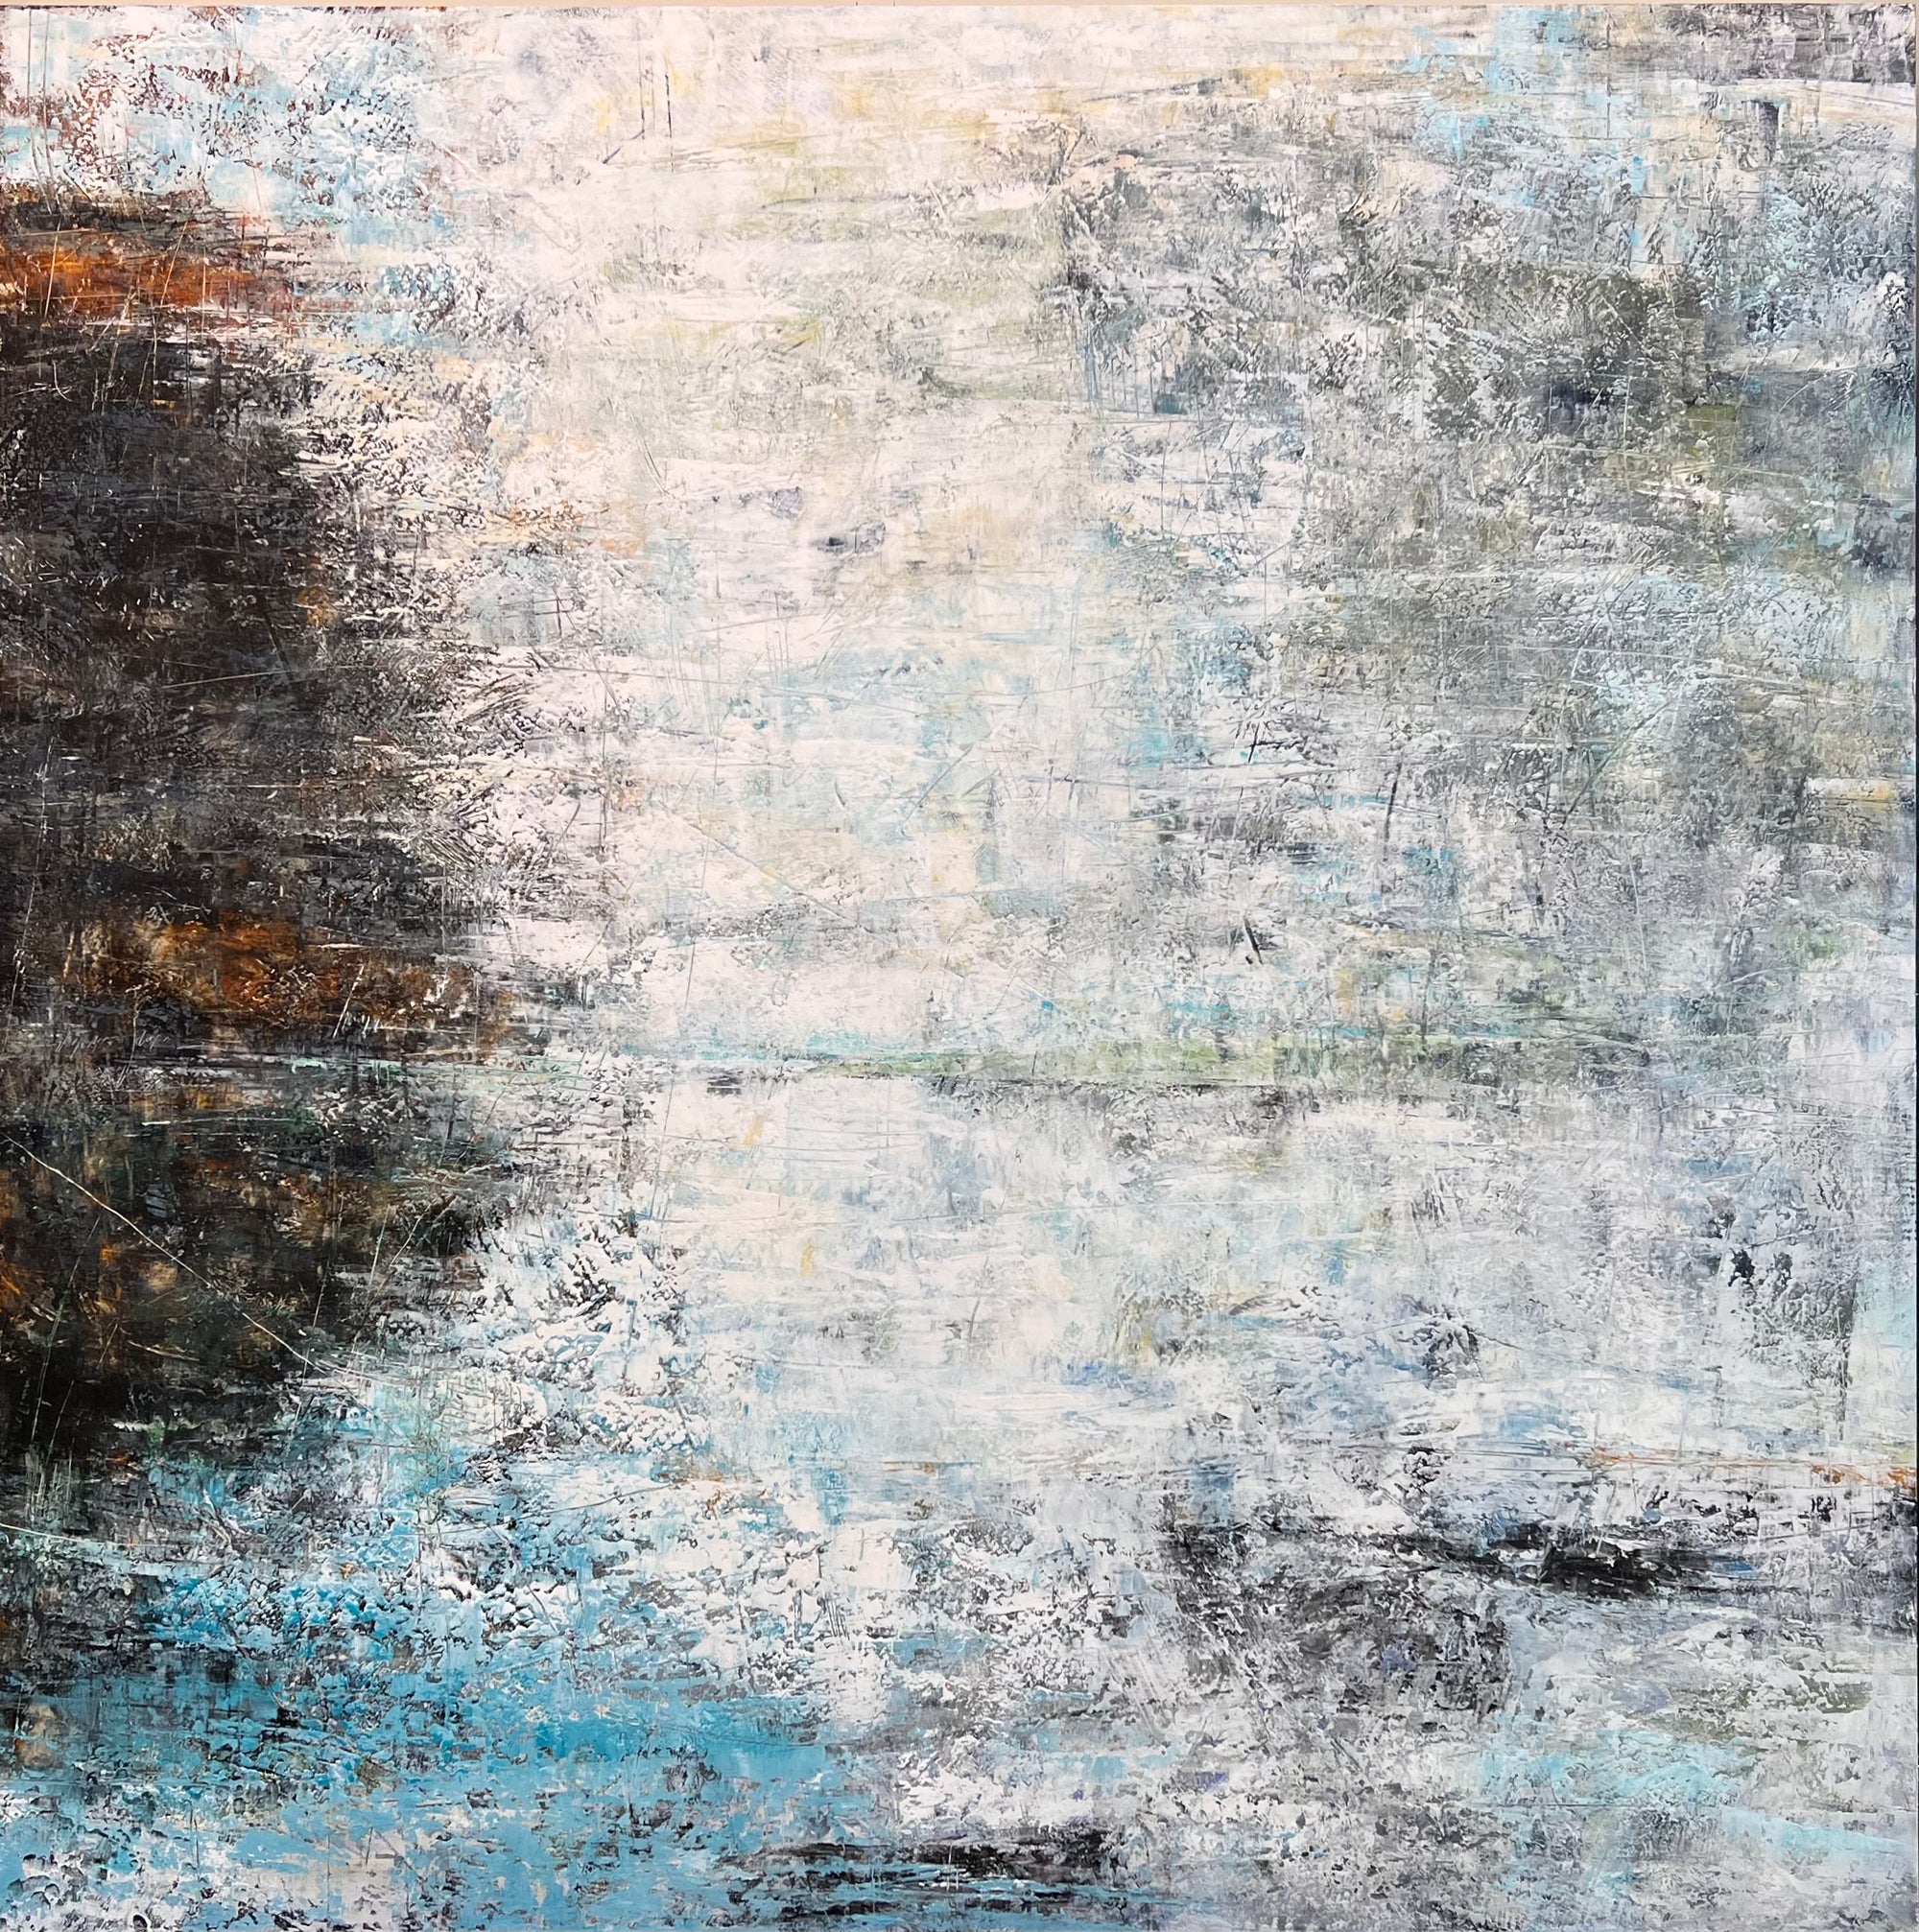 Lost in togetherness 60"x60"